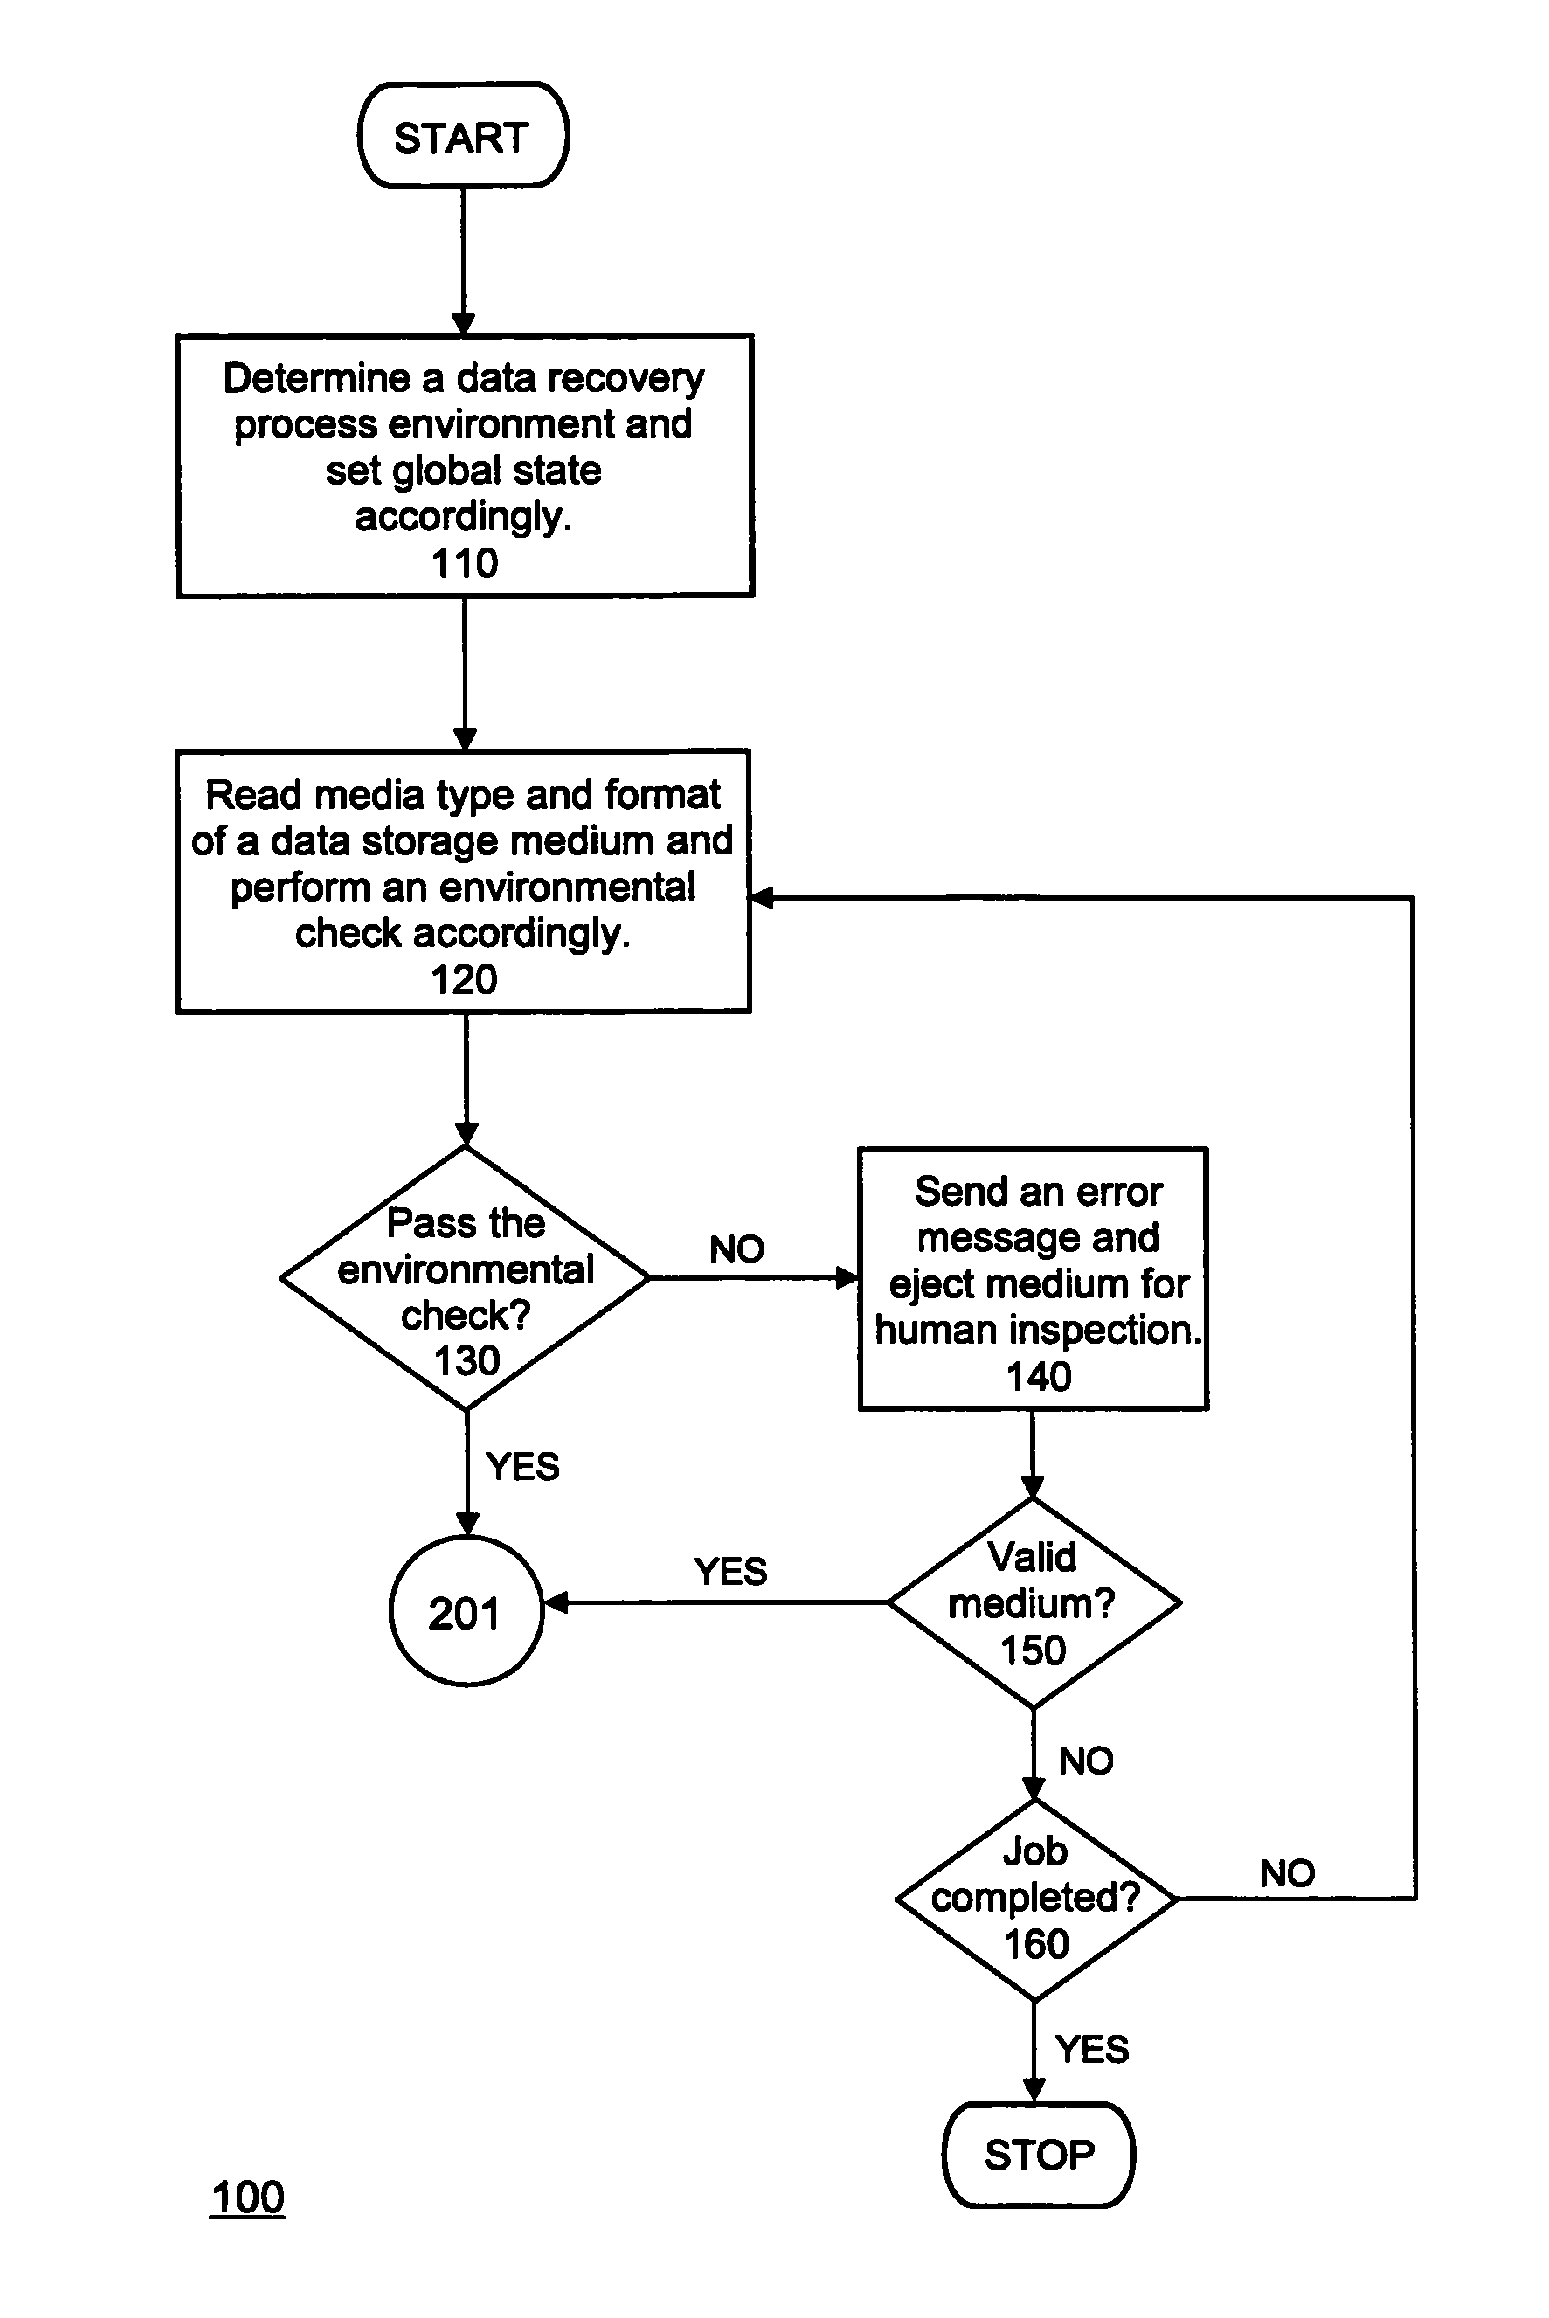 System and method for detecting incongruous or incorrect media in a data recovery process